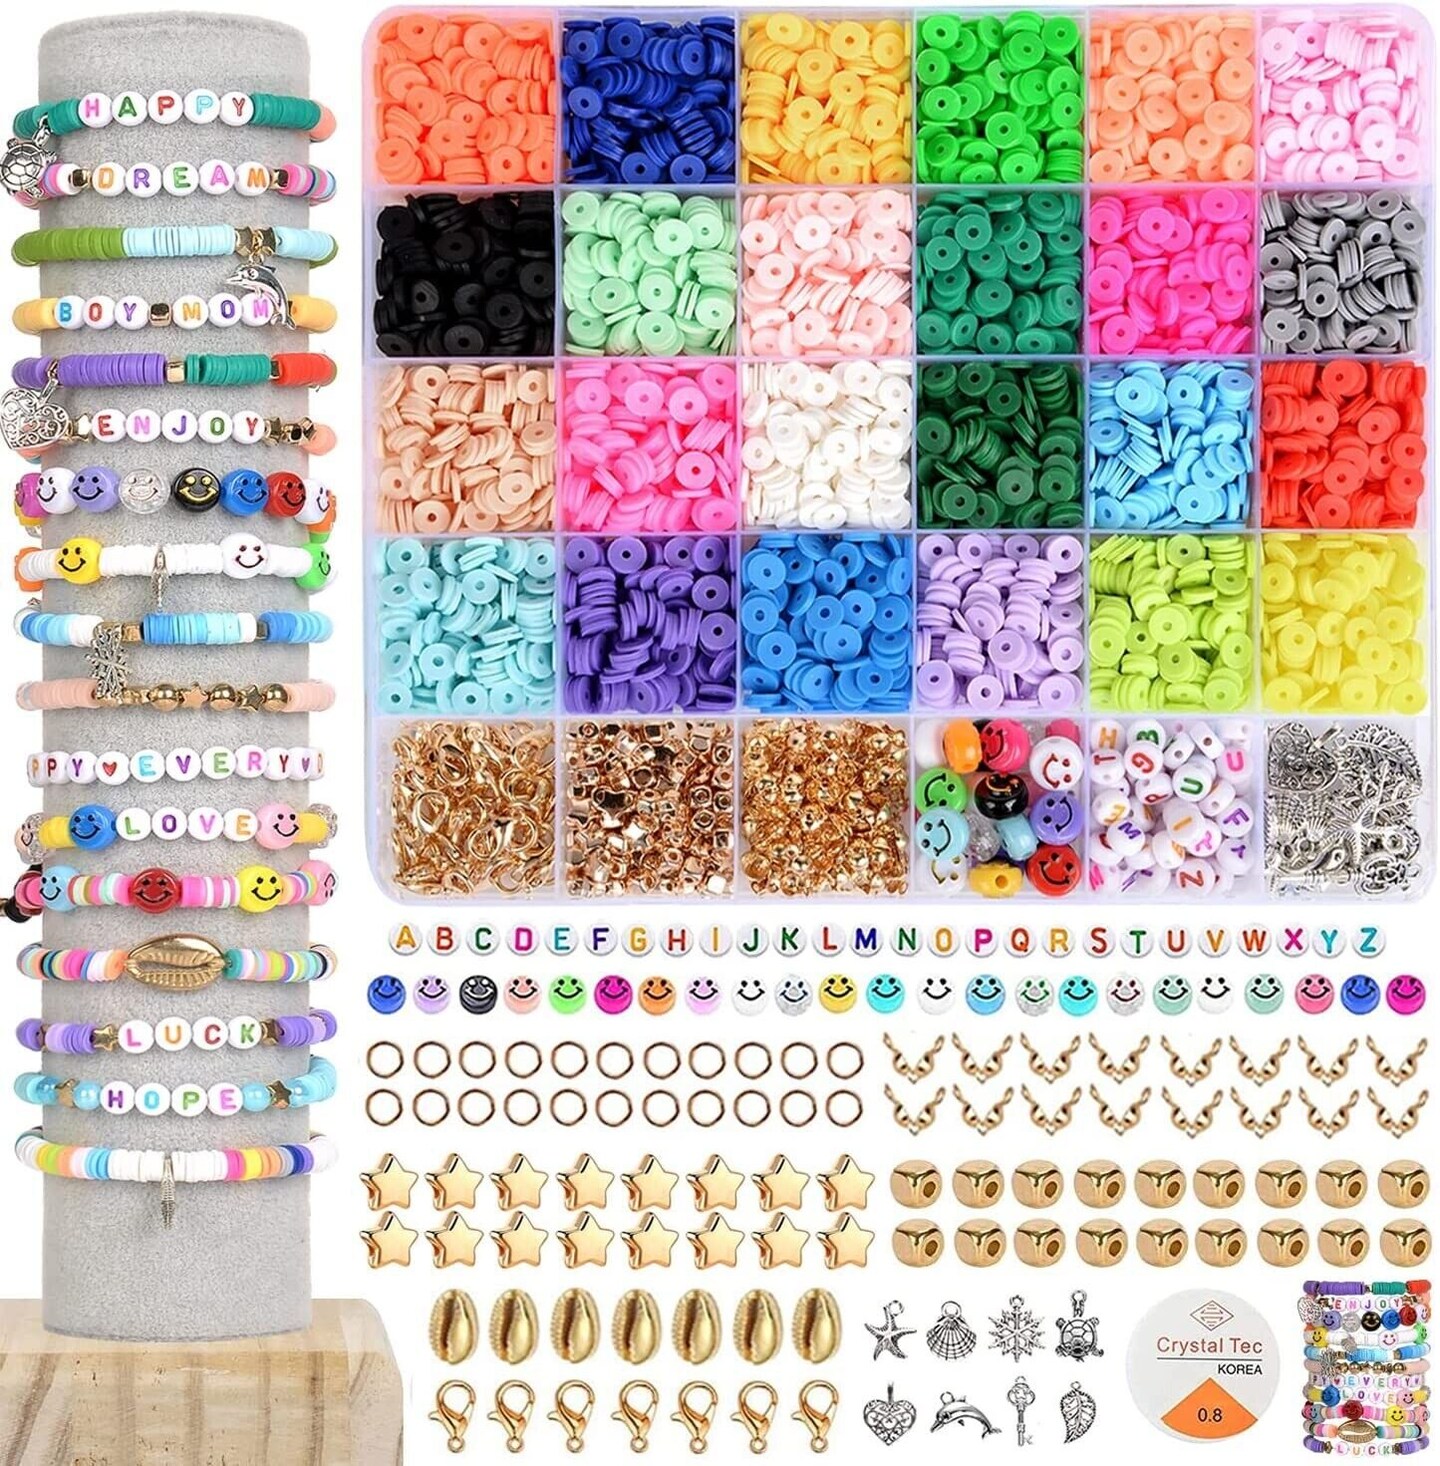 Kitcheniva Colored Polymer Clay Bead Kit 4270 Pieces